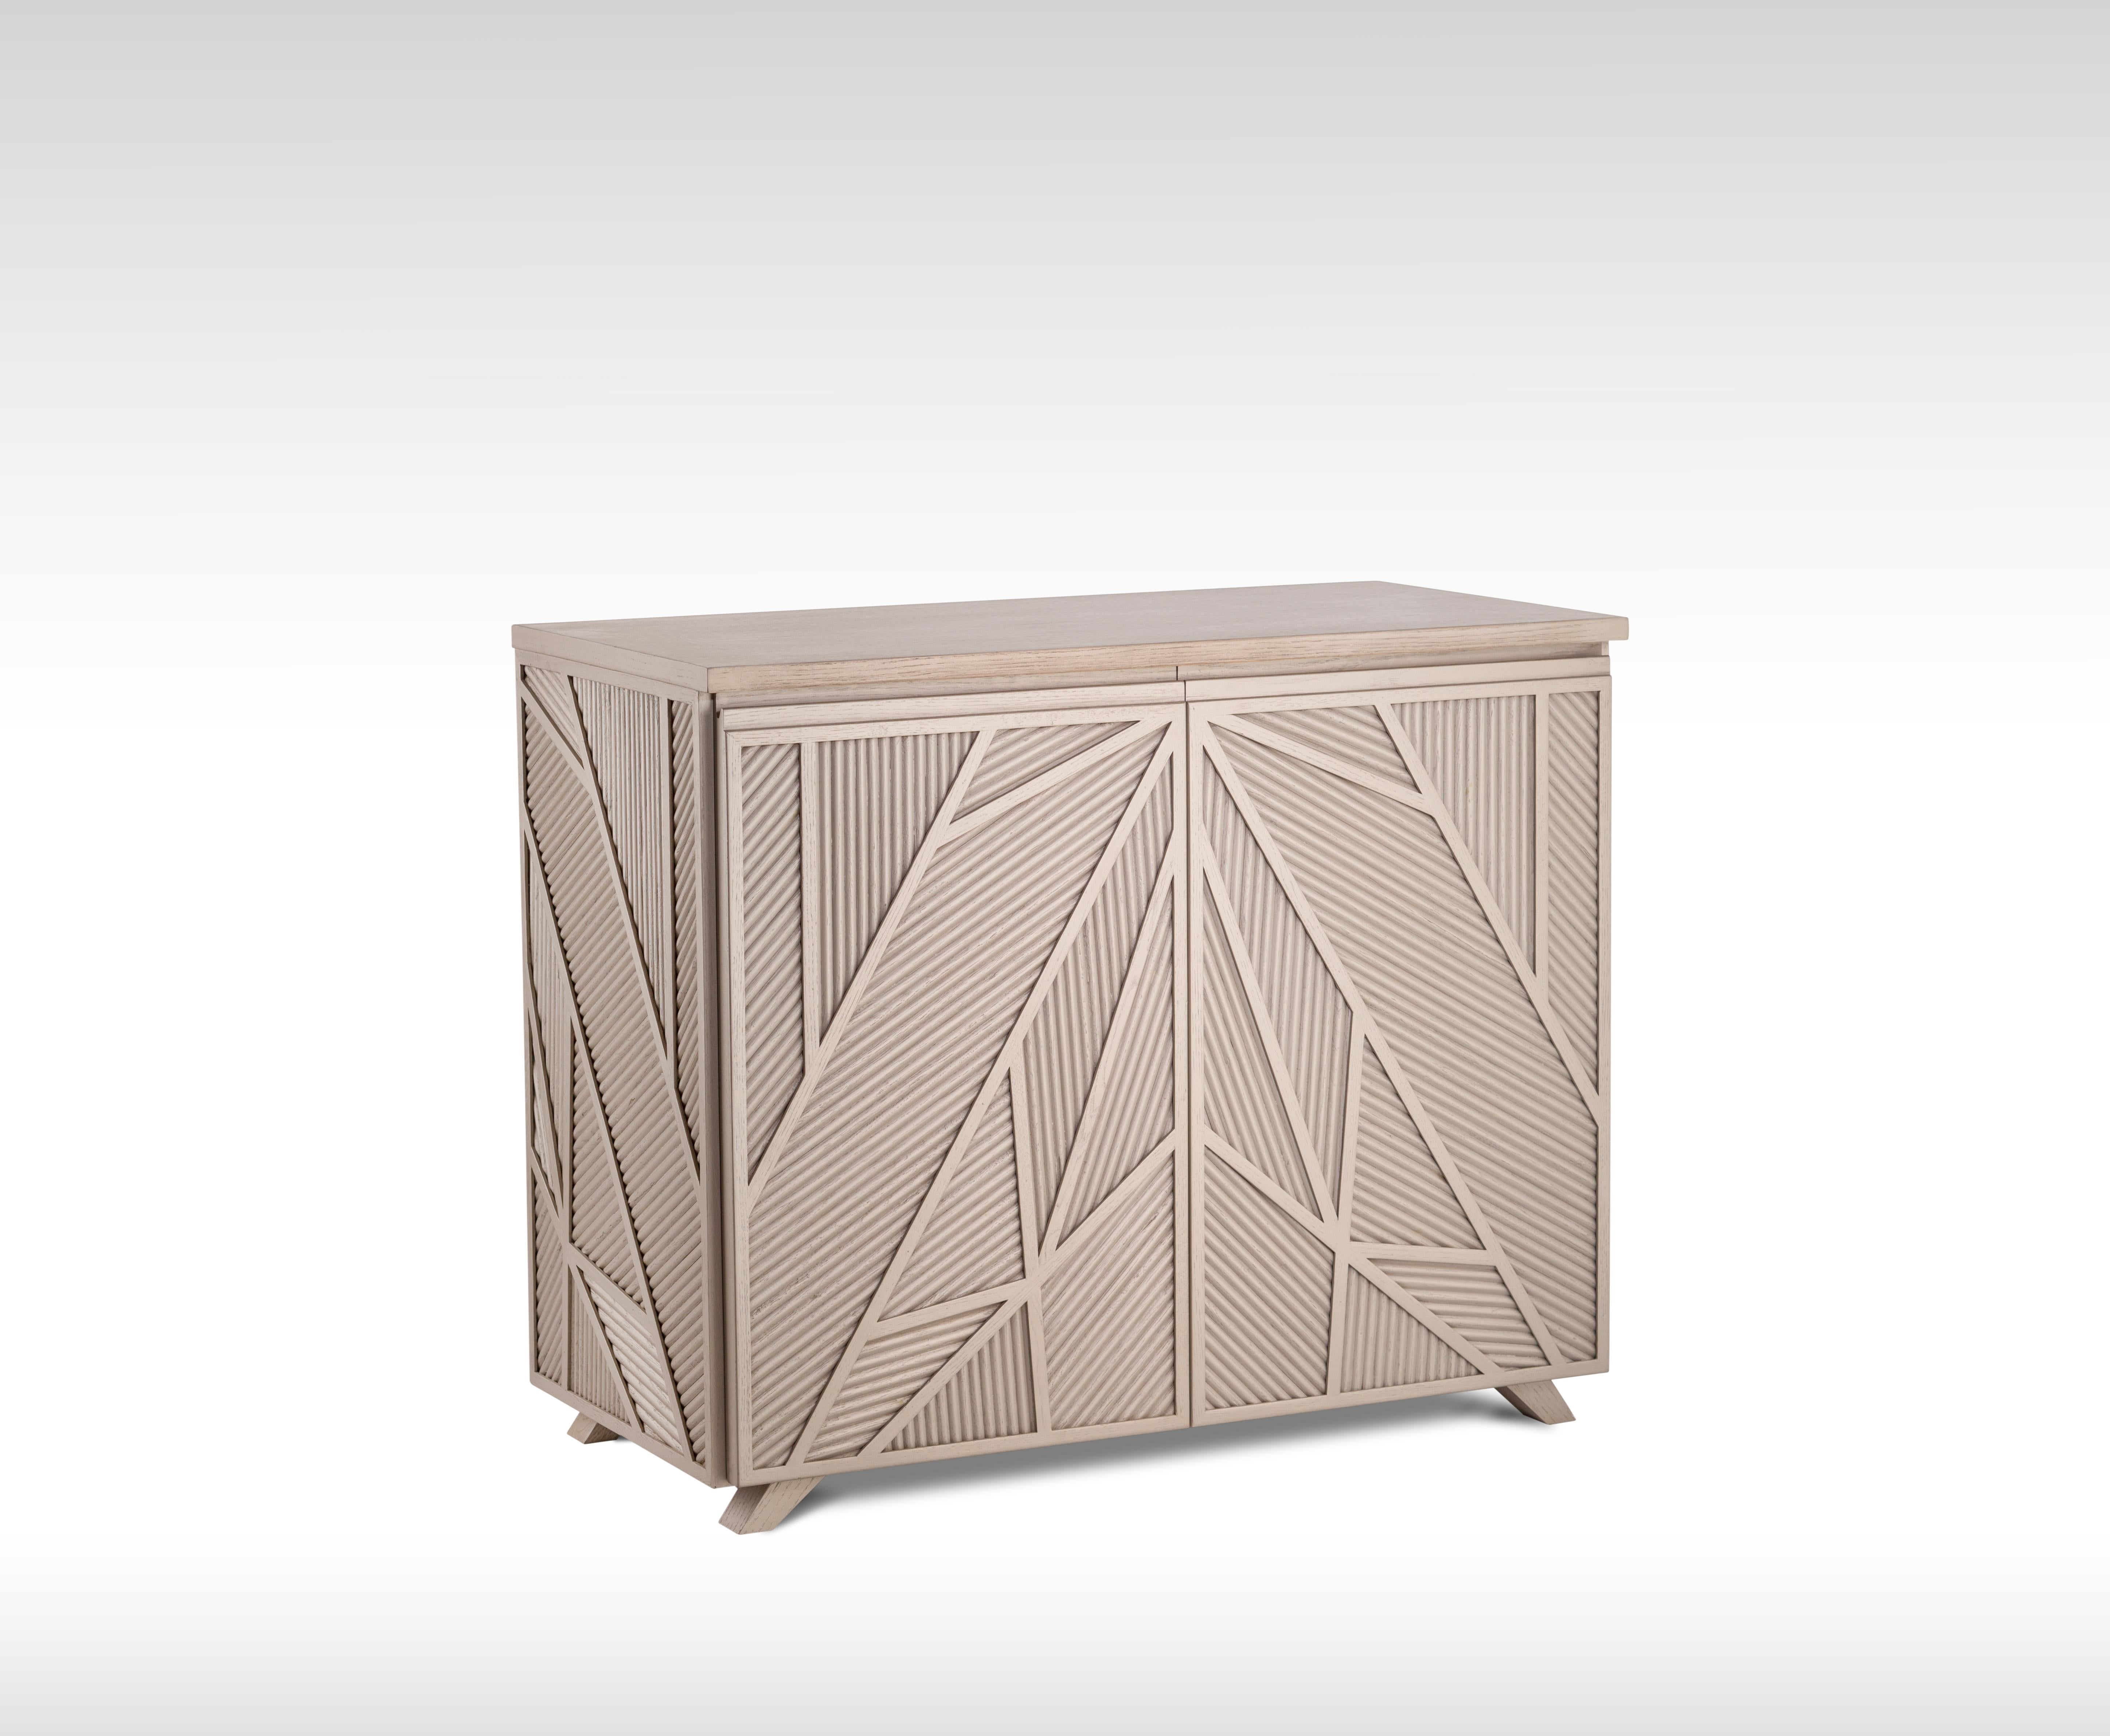 Modern Geometric Oak Sticks Cabinet Inspired from Ancient Egypt Use of Palm Branches For Sale